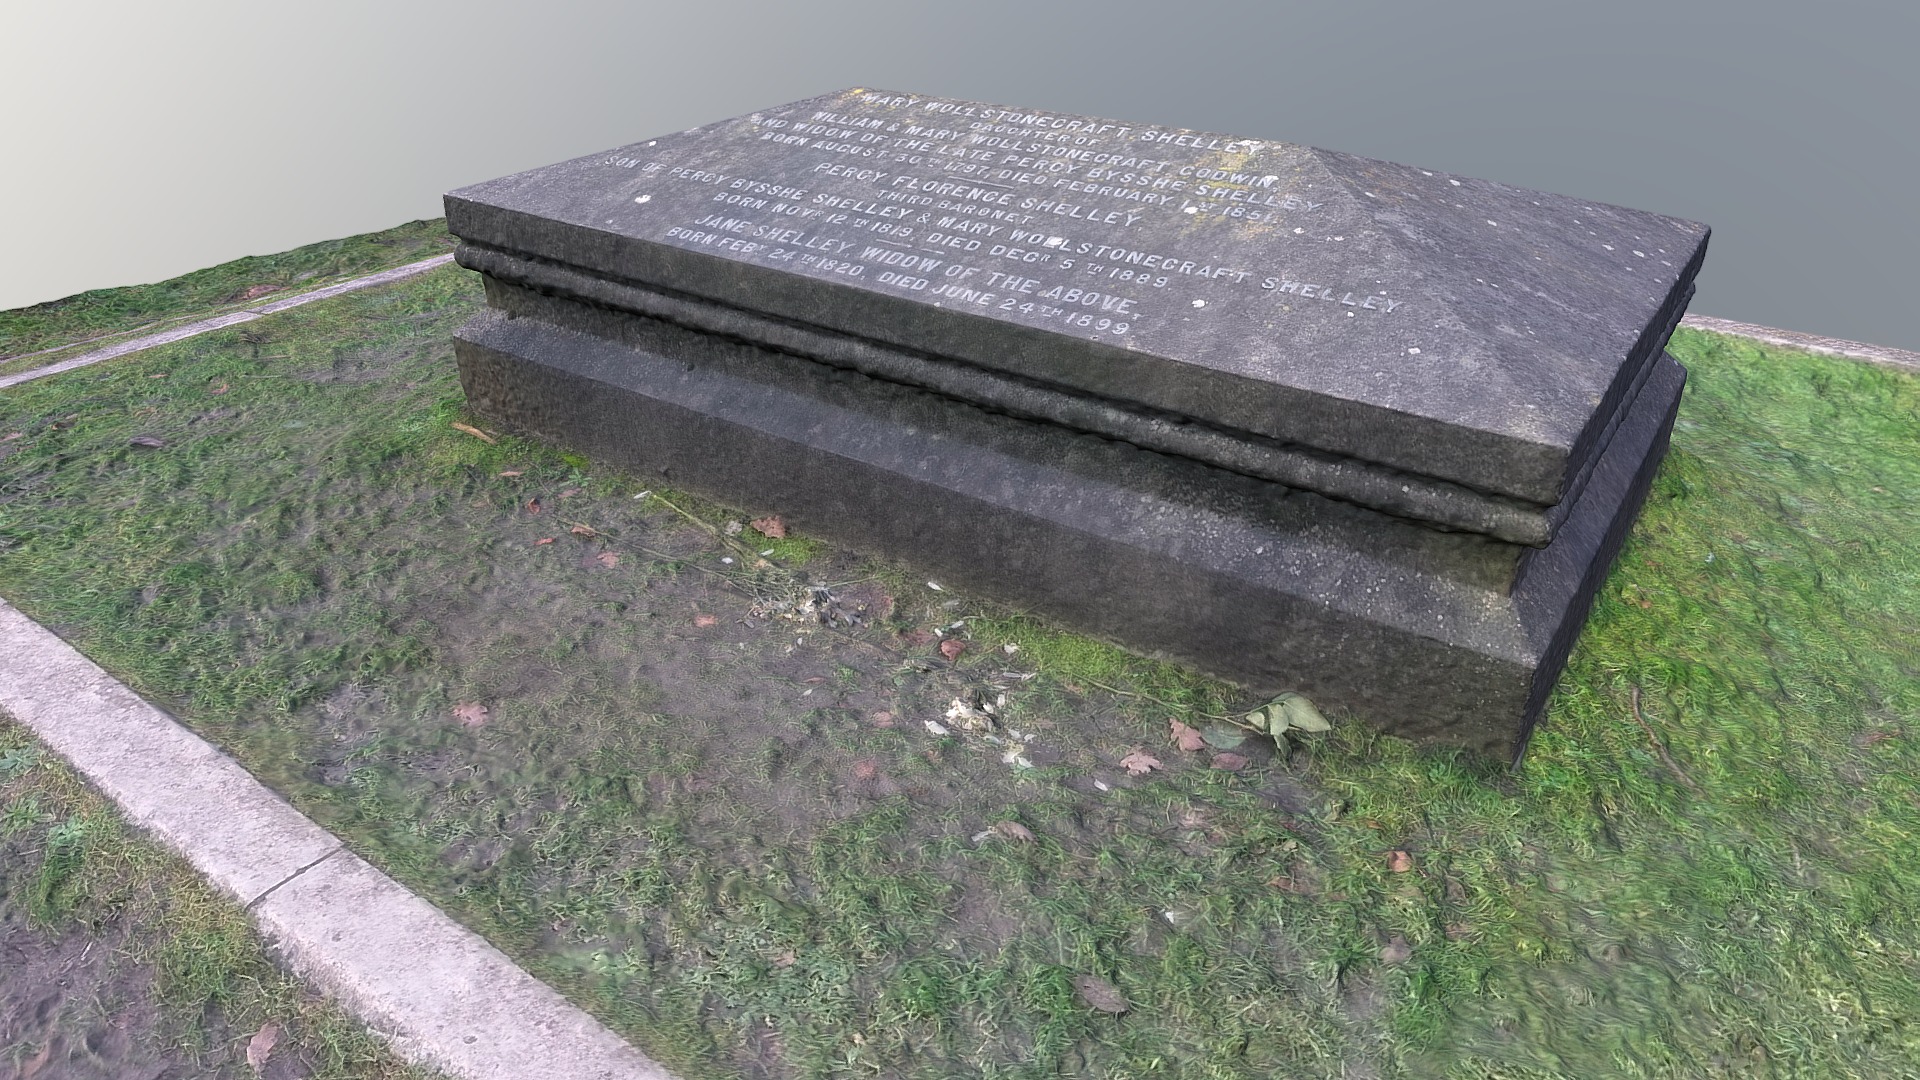 3D model Mary Shelley’s Grave, Bournemouth - This is a 3D model of the Mary Shelley's Grave, Bournemouth. The 3D model is about a stone bench on a grassy hill.